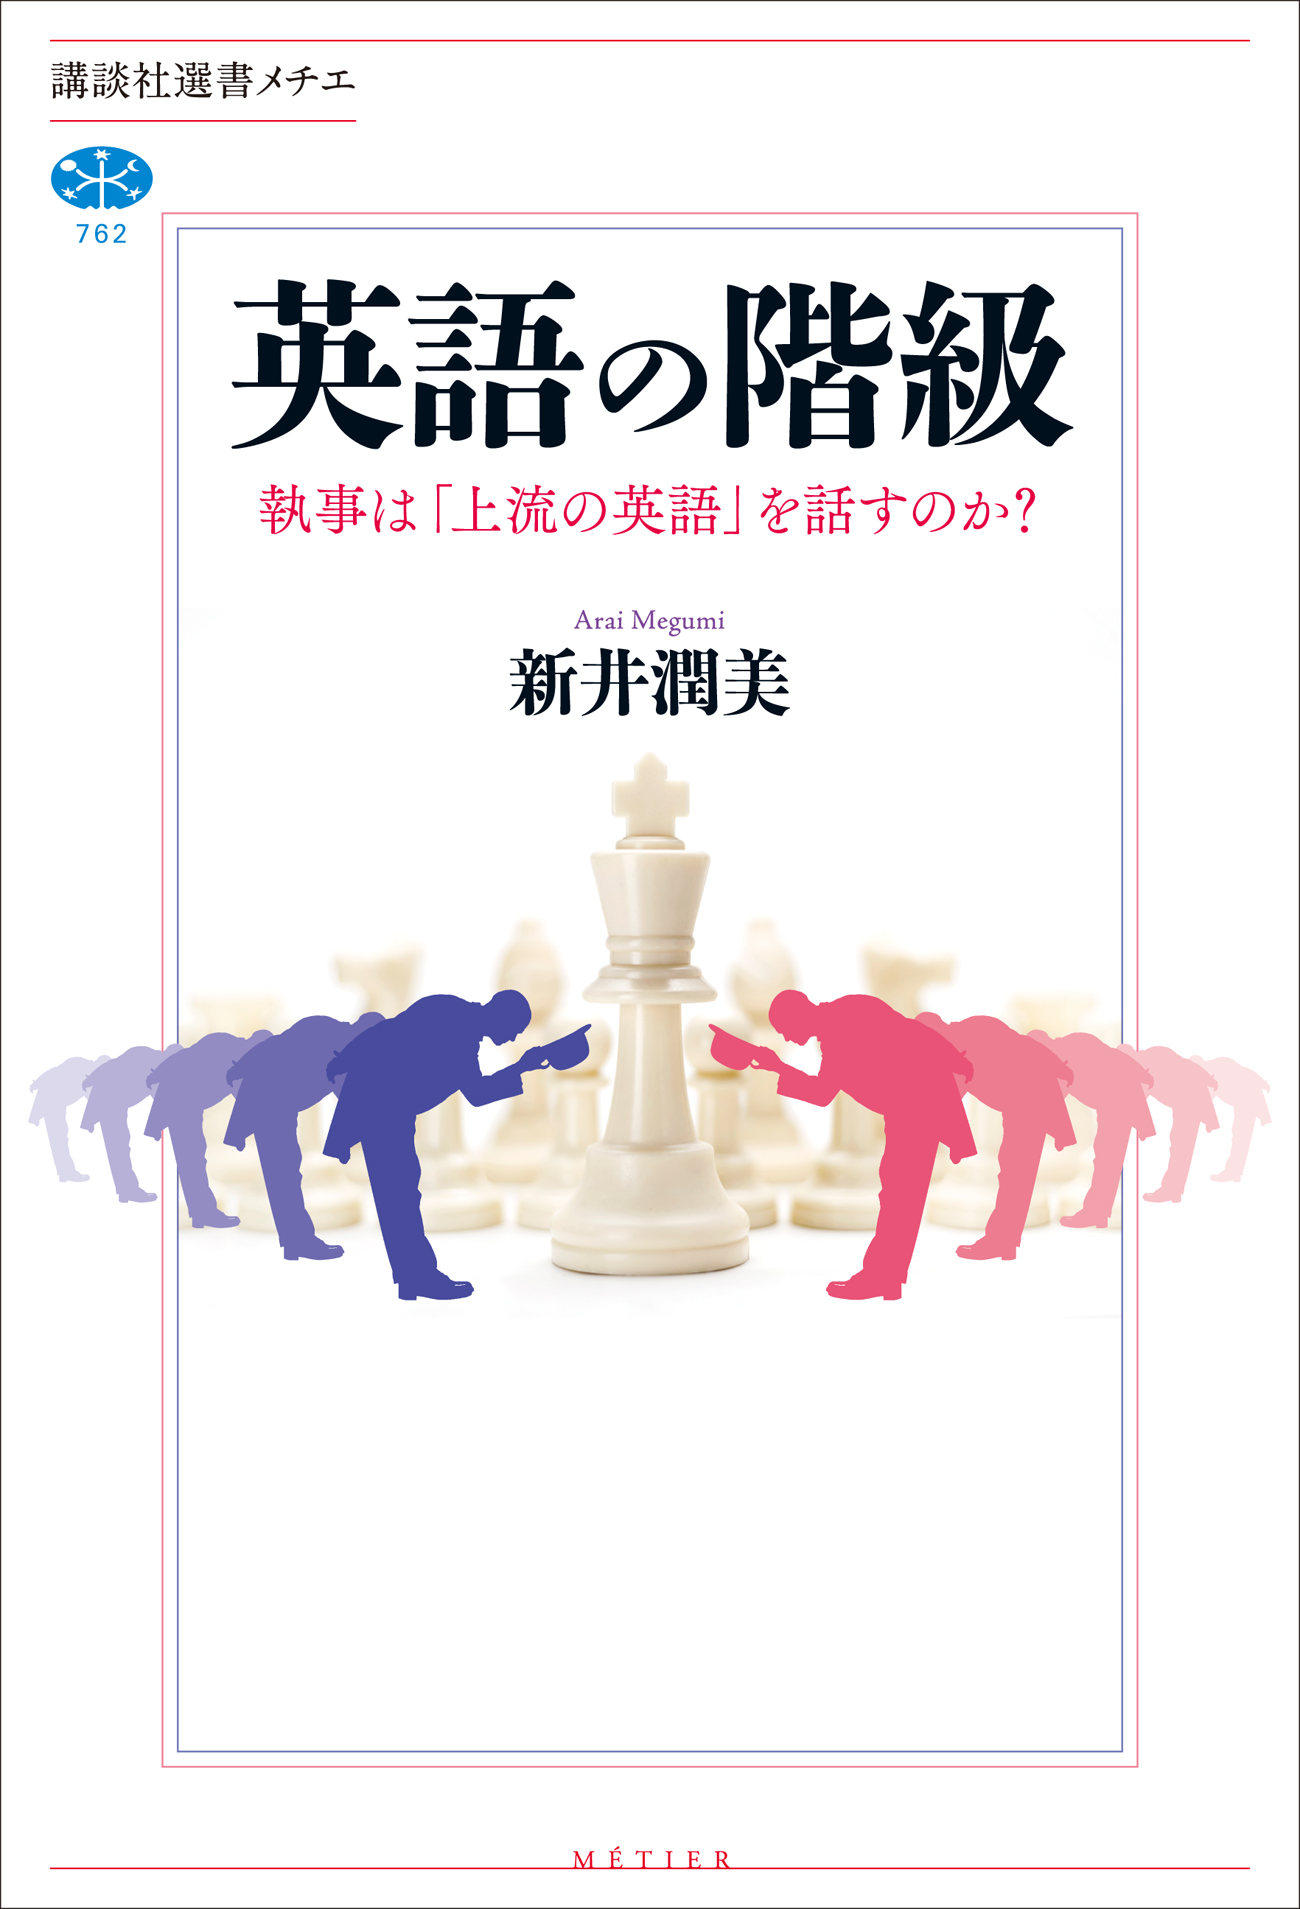 A white cover, chess pieces, silhouette of butlers